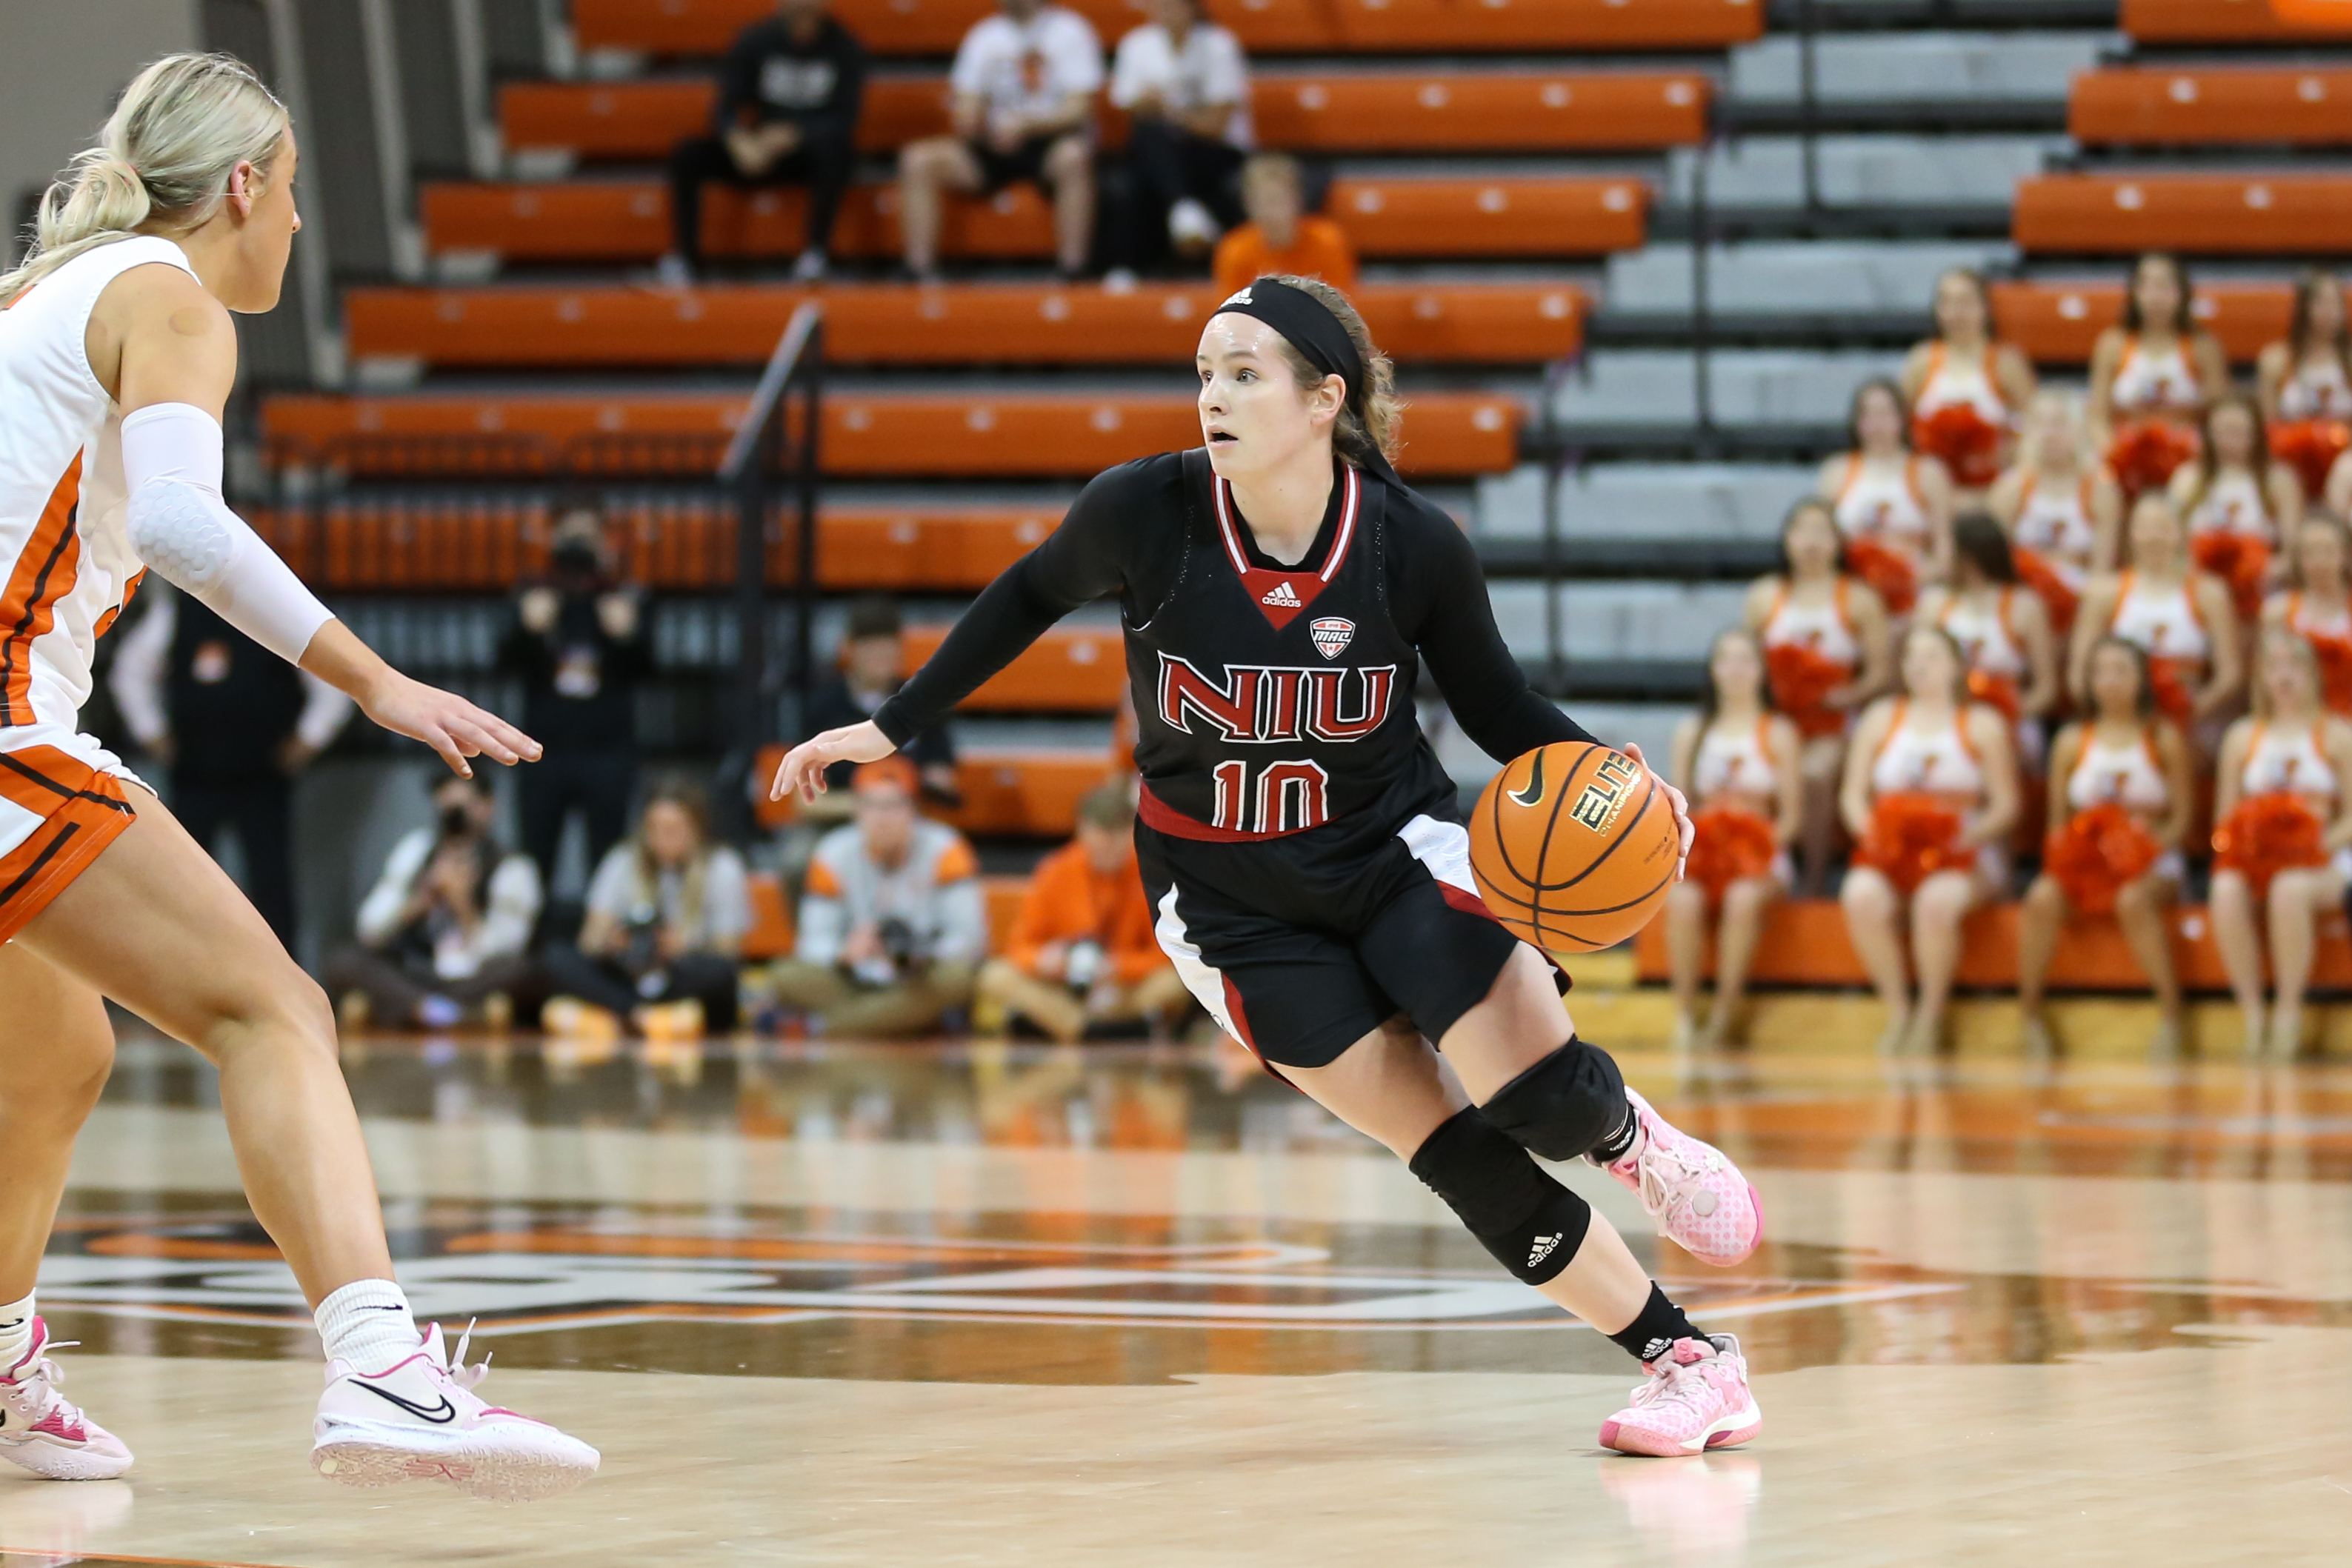 COLLEGE BASKETBALL: FEB 15 Women’s Northern Illinois at Bowling Green